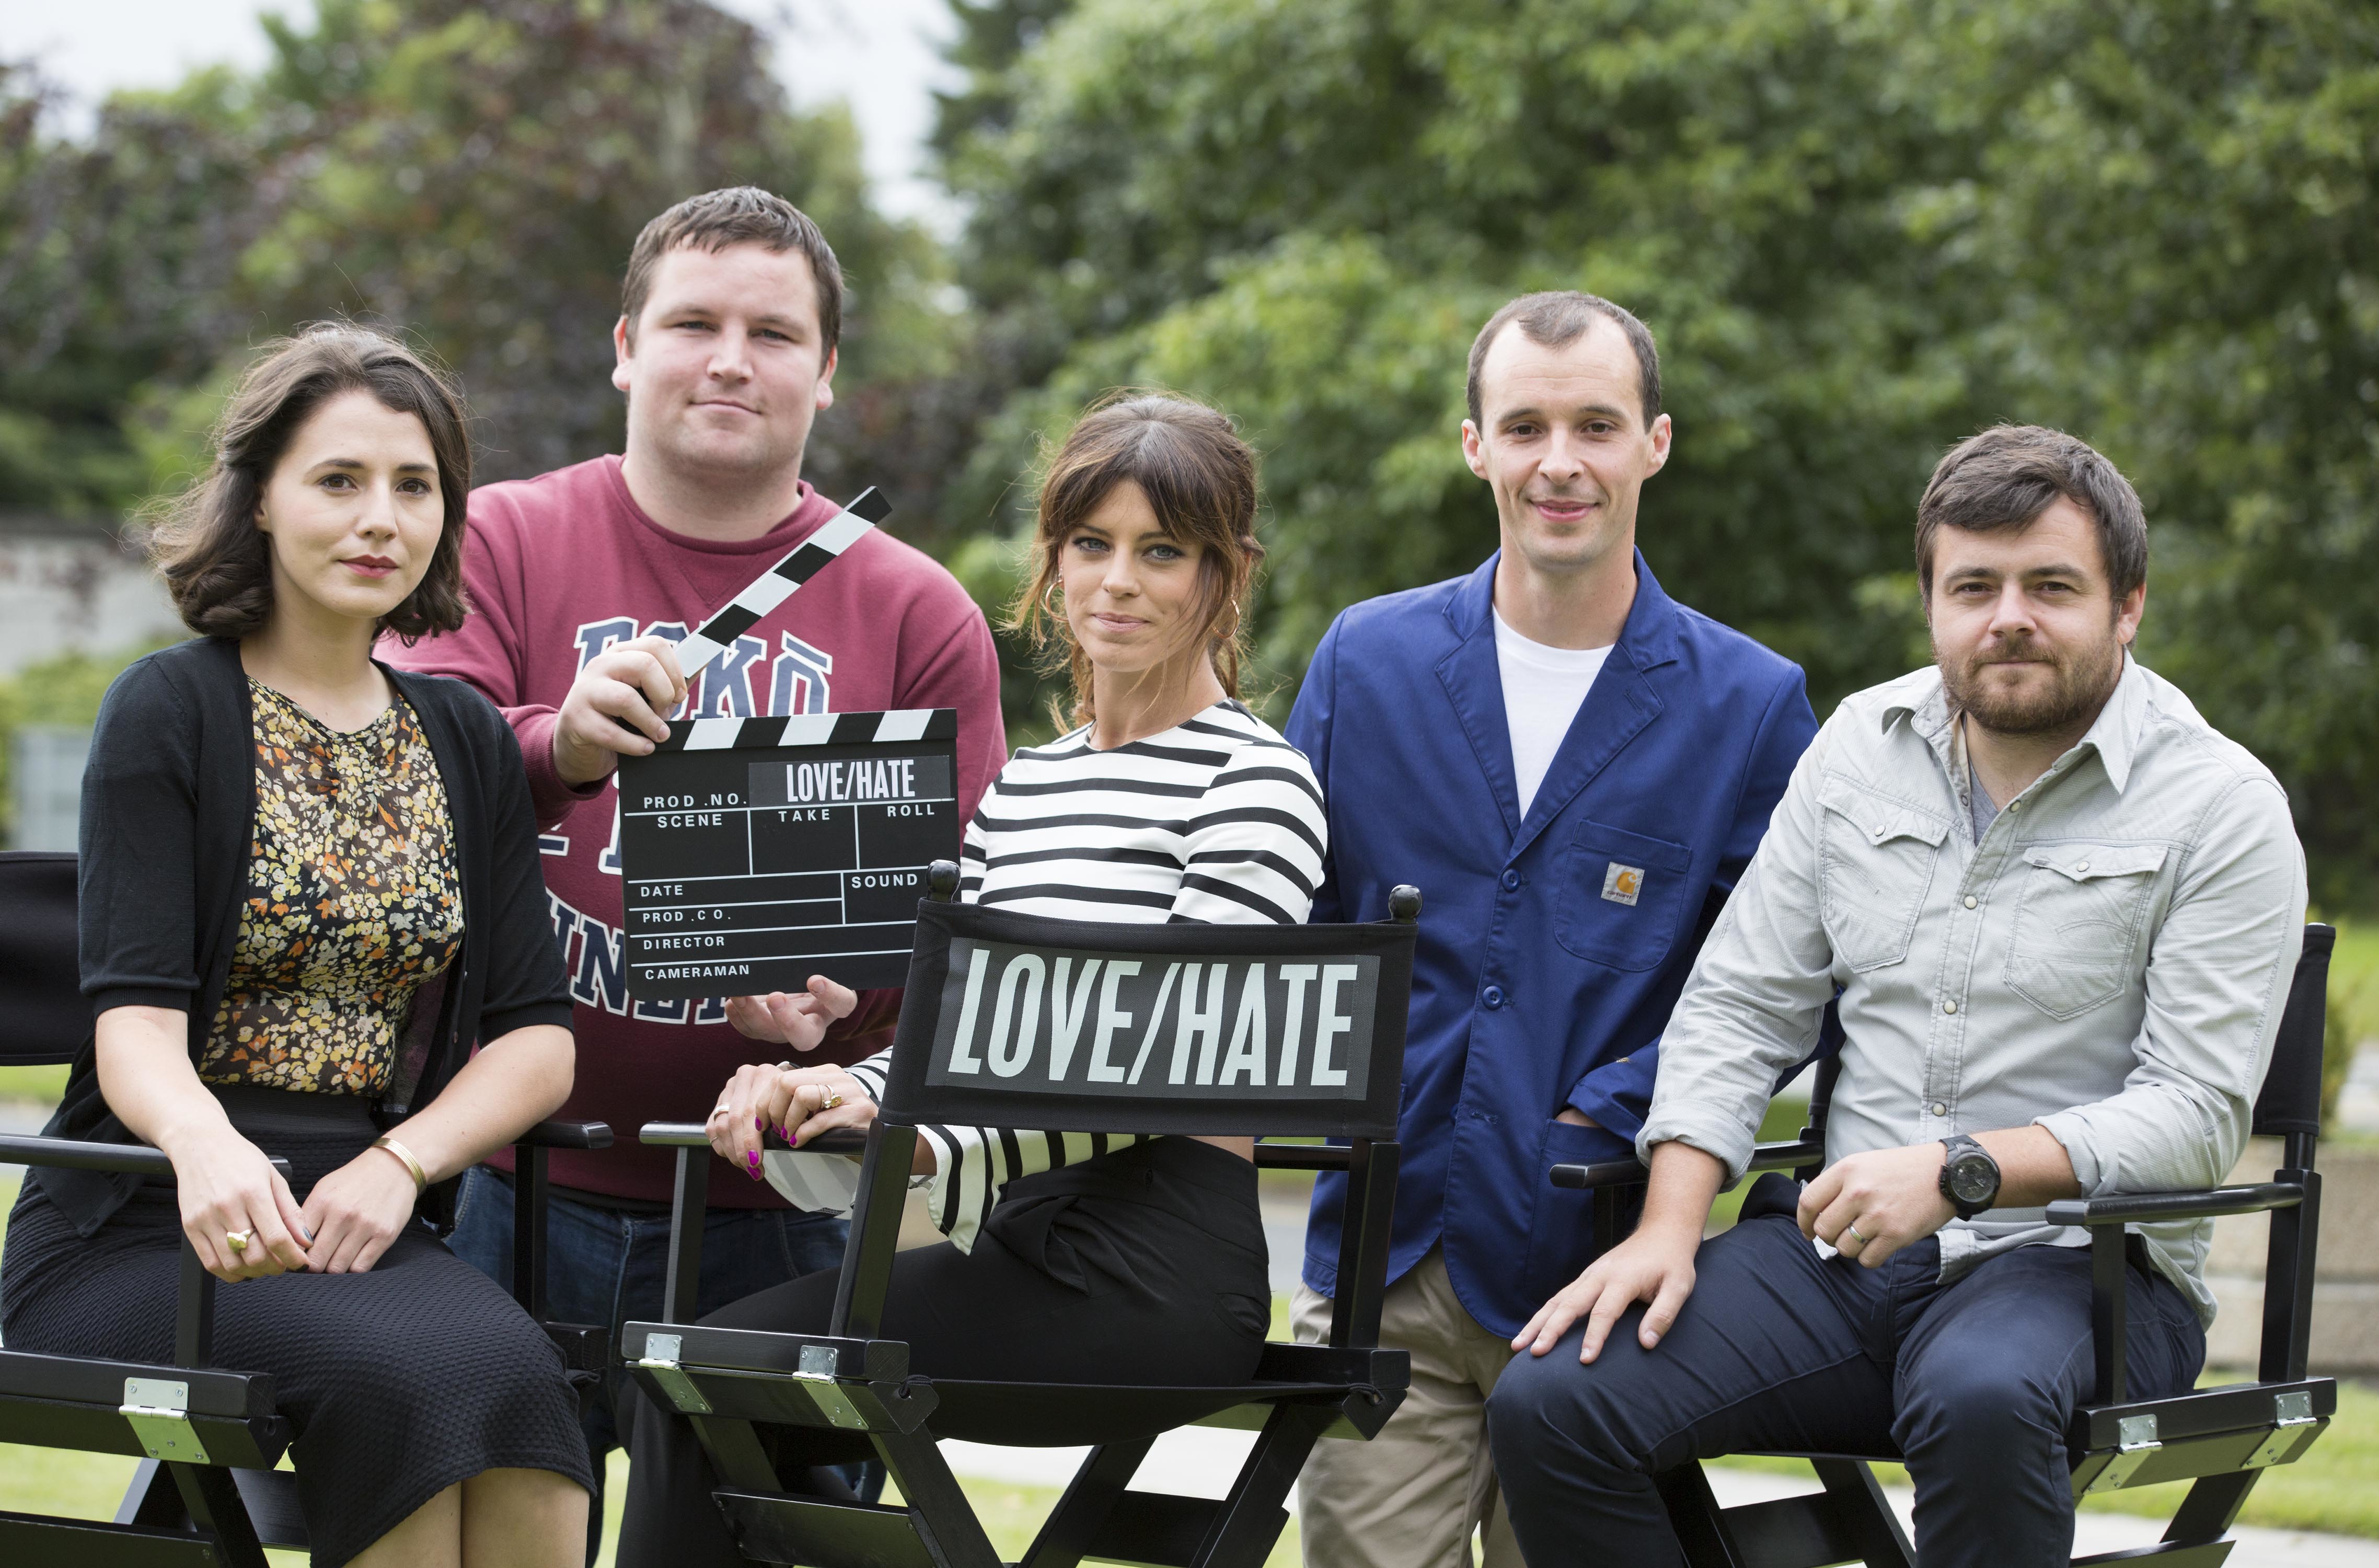 Charlie Murphy, John Connors, Aoibhinn McGinnity, Tom Vaughan-Lawlor and Laurence Kinlan at the event Love/Hate